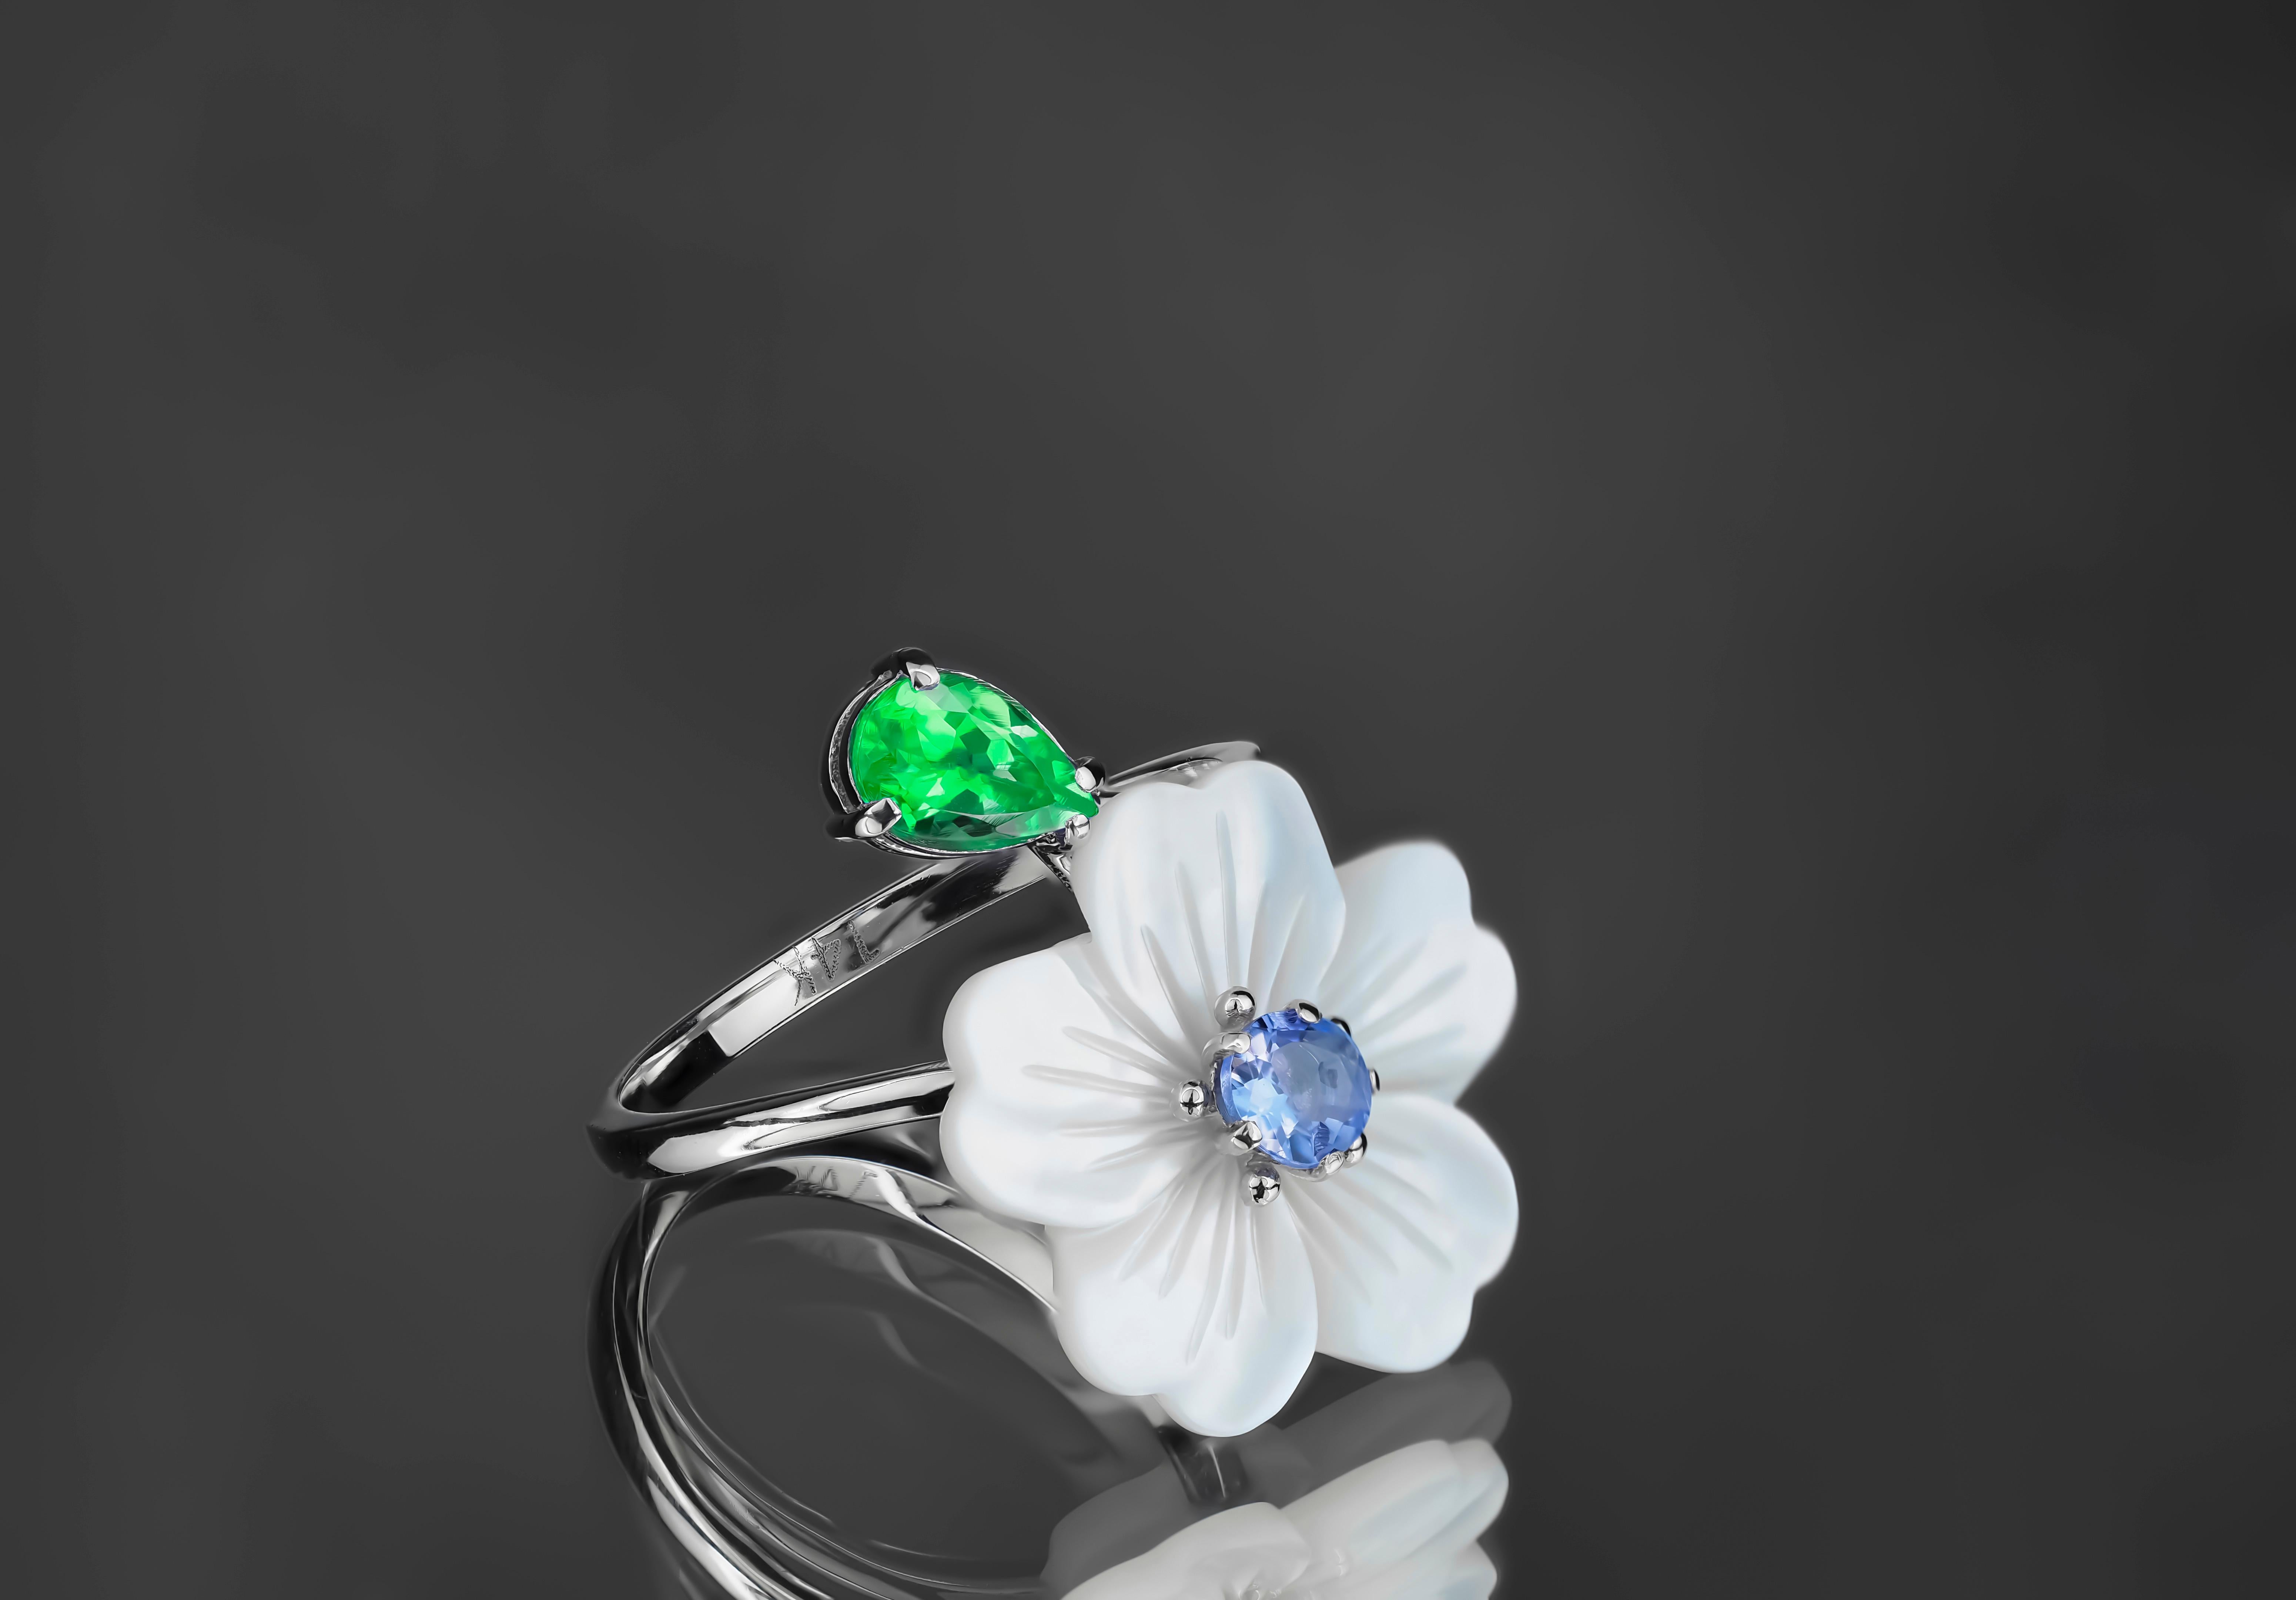 Carved Flower 14k ring with gemstones.
Lab emerald and sapphire ring in 14k gold. Carved mother of pearl flower ring. Flower gold ring. Emerald vintage ring. Nature inspired ring with mother of pearl flower. Shell flower ring.

Metal: 14k solid